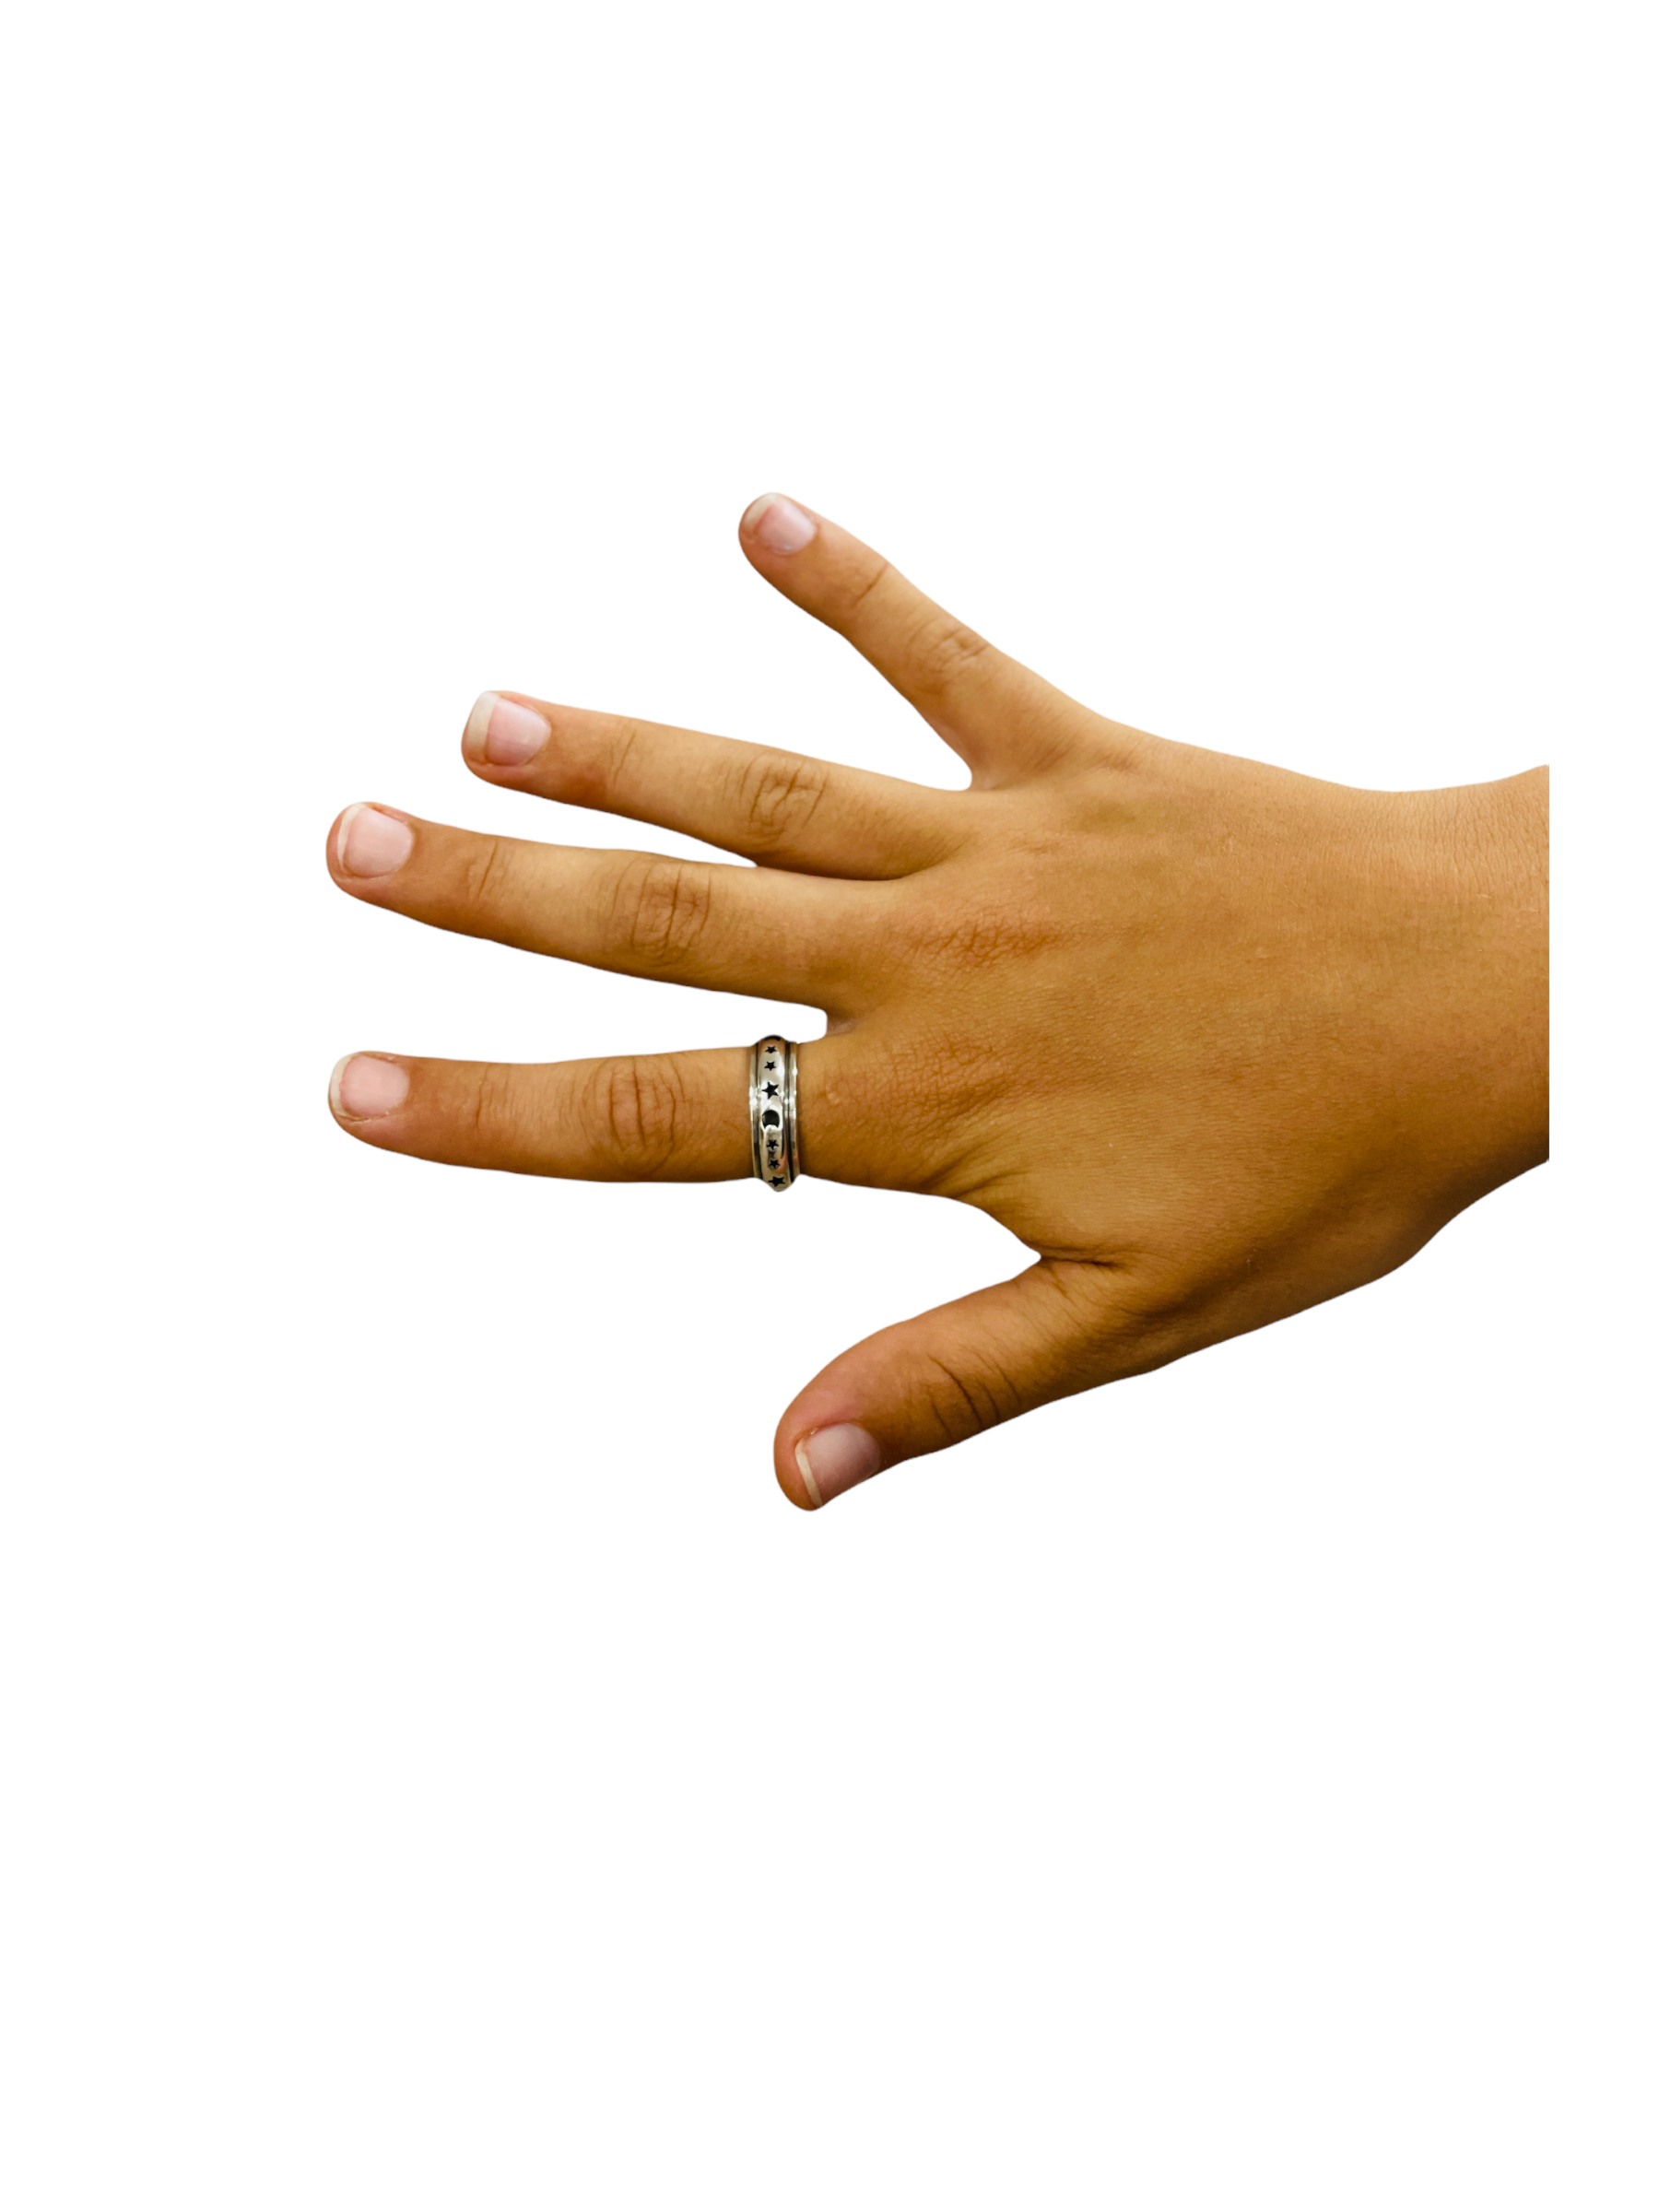 Hand wearing Impulse Modern Anxiety Ring - Moon & Stars/9 on white background